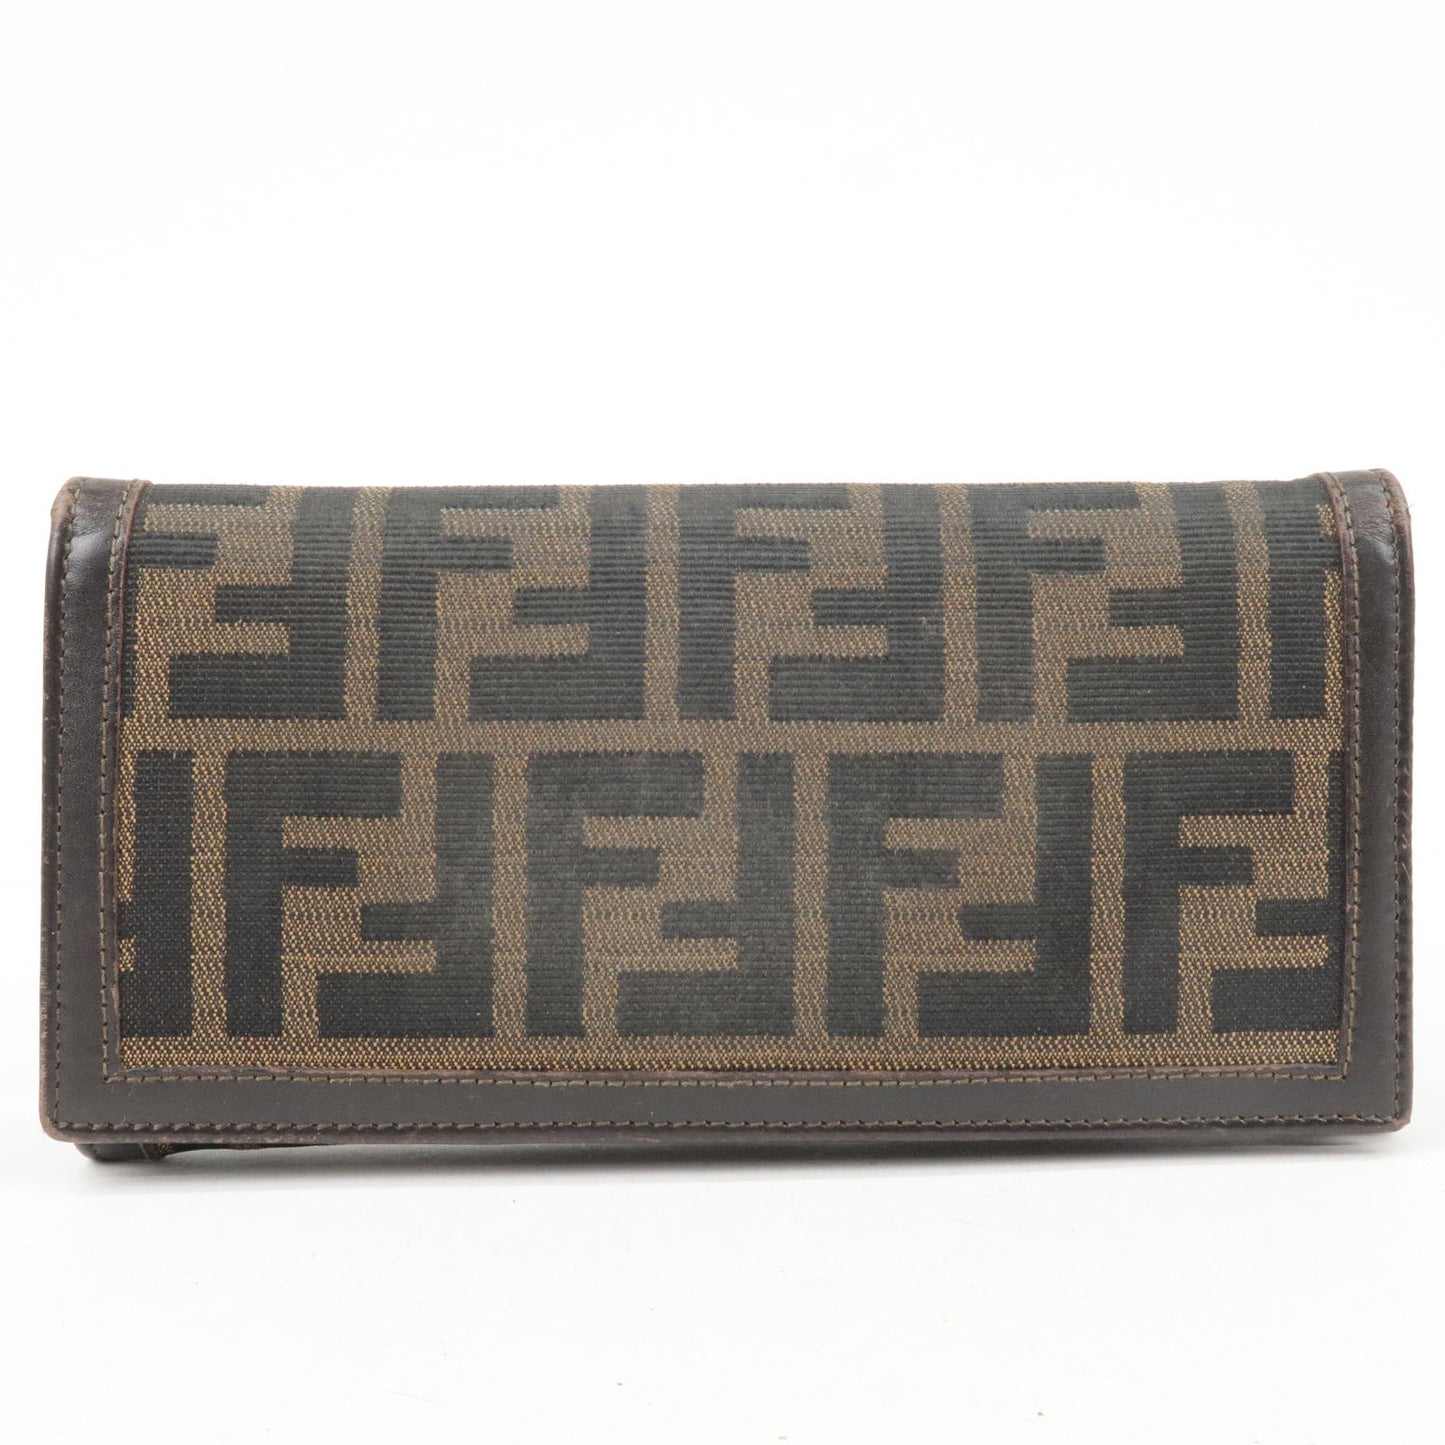 FENDI Zucca Print Canvas Leather Long Wallet Brown 30851